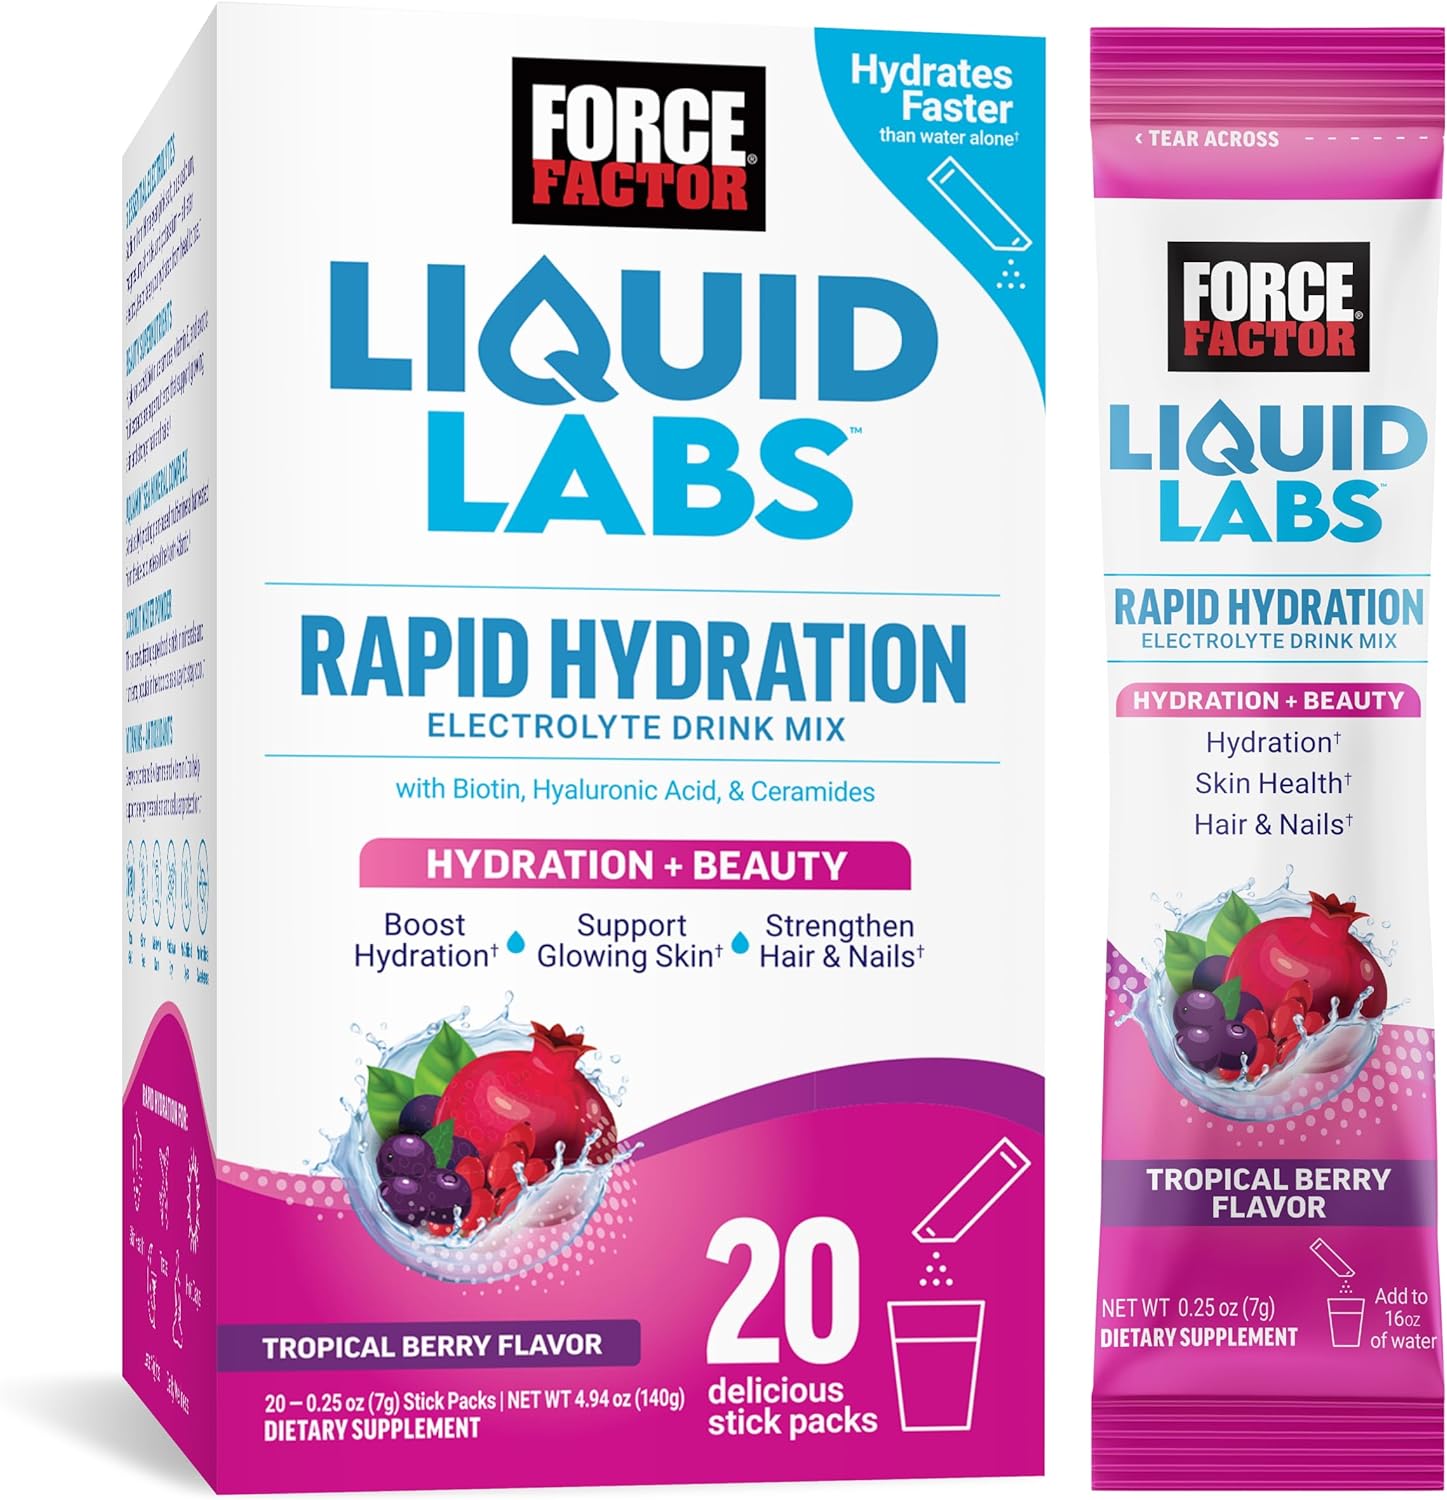 Force Factor Liquid Labs Beauty, Hydration Packet for Stronger Hair, Skin & Nails. Electrolytes powder with Hyaluronic Acid, Biotin, and Ceramides. Tropical Berry Flavor, 20 Stick Packs